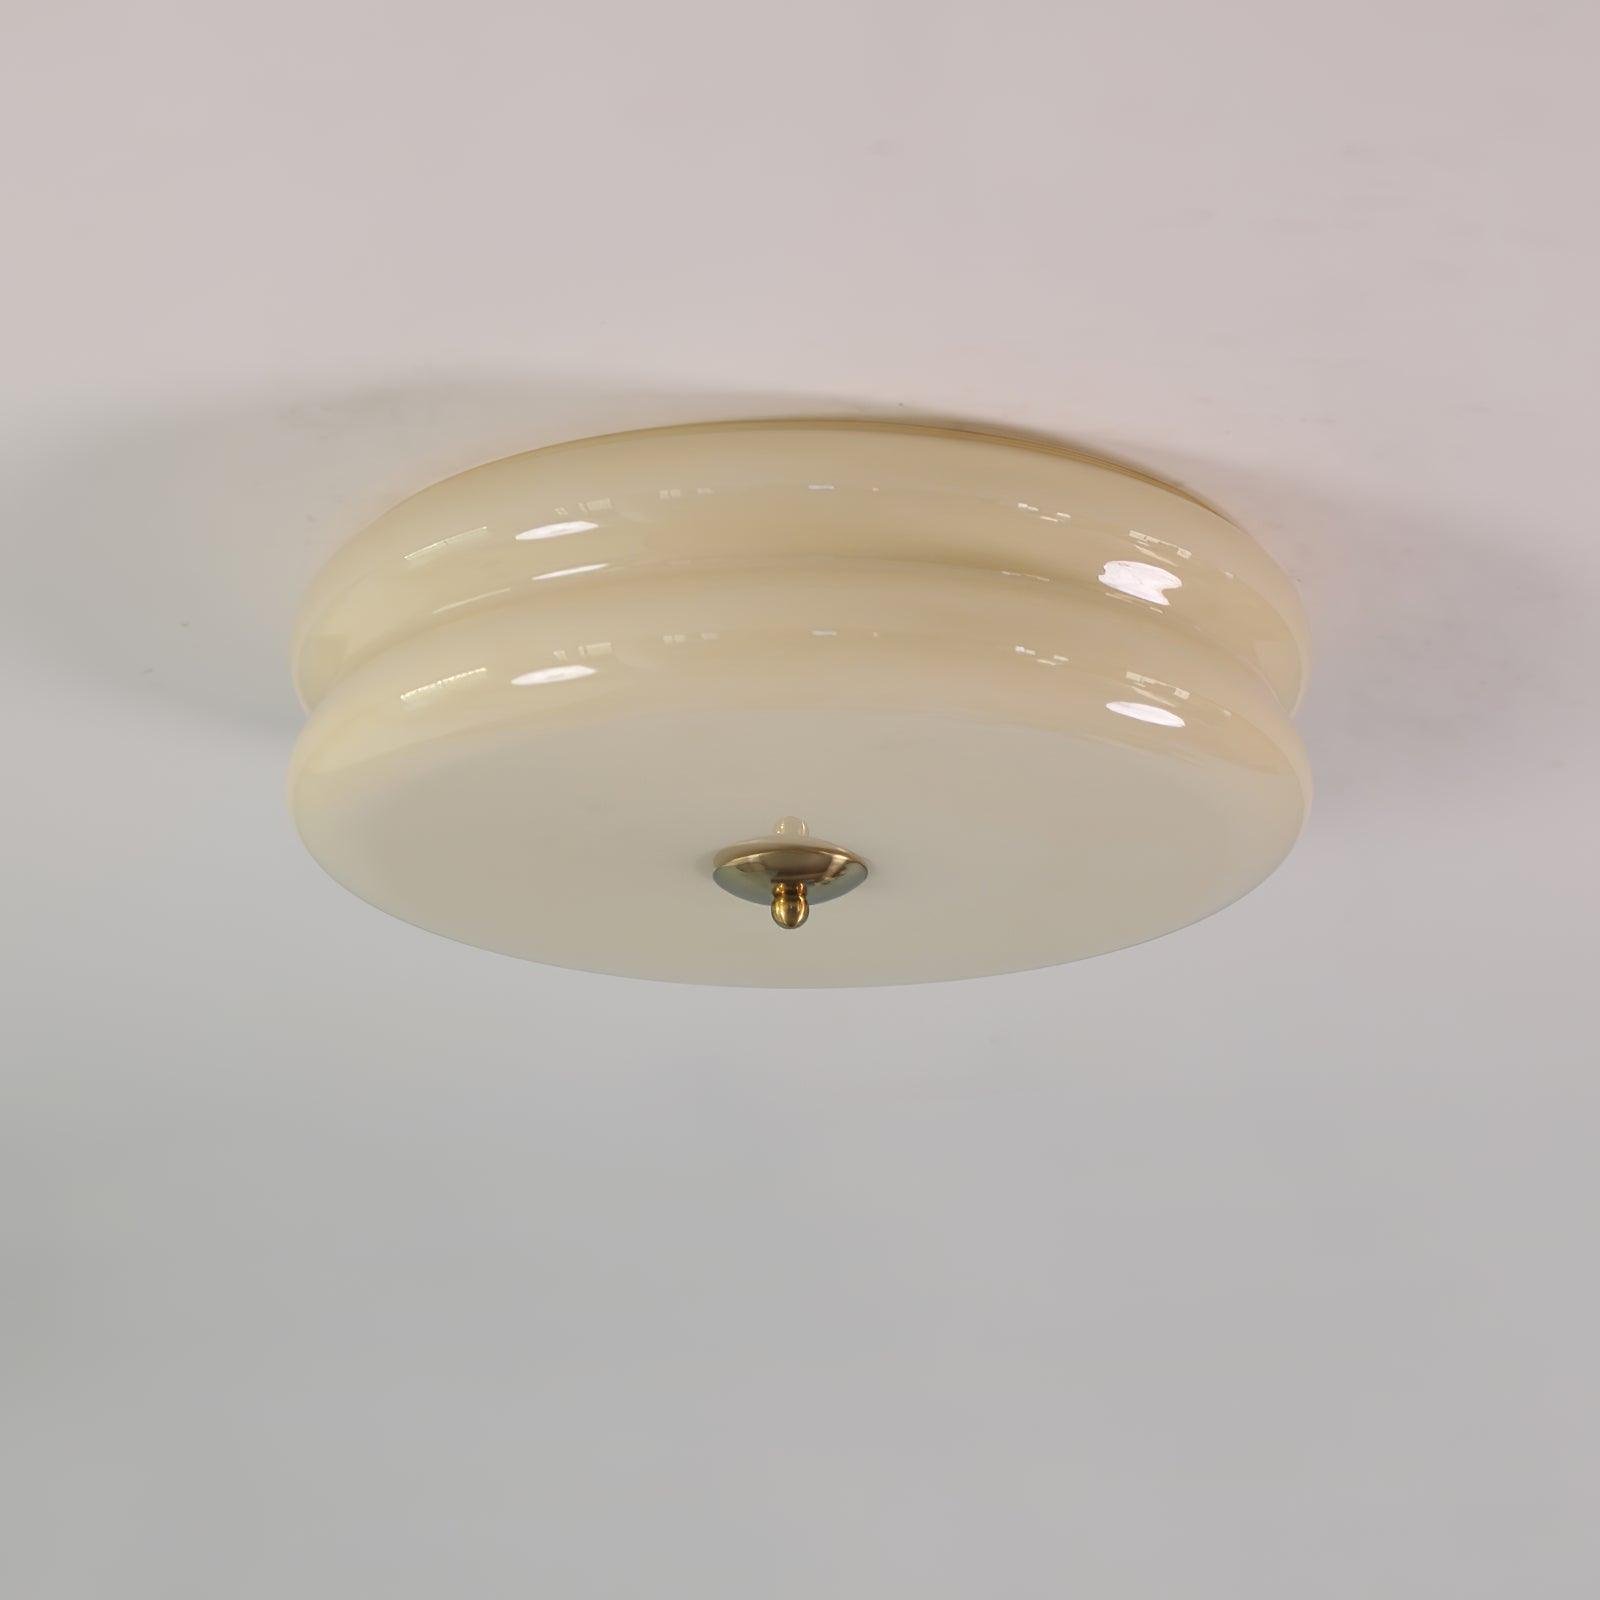 Art Deco Vintage Ceiling Light in Gold and Beige with Cool Light, Dimensions: 12.6" Diameter x 5.1" Height (32cm x 13cm)